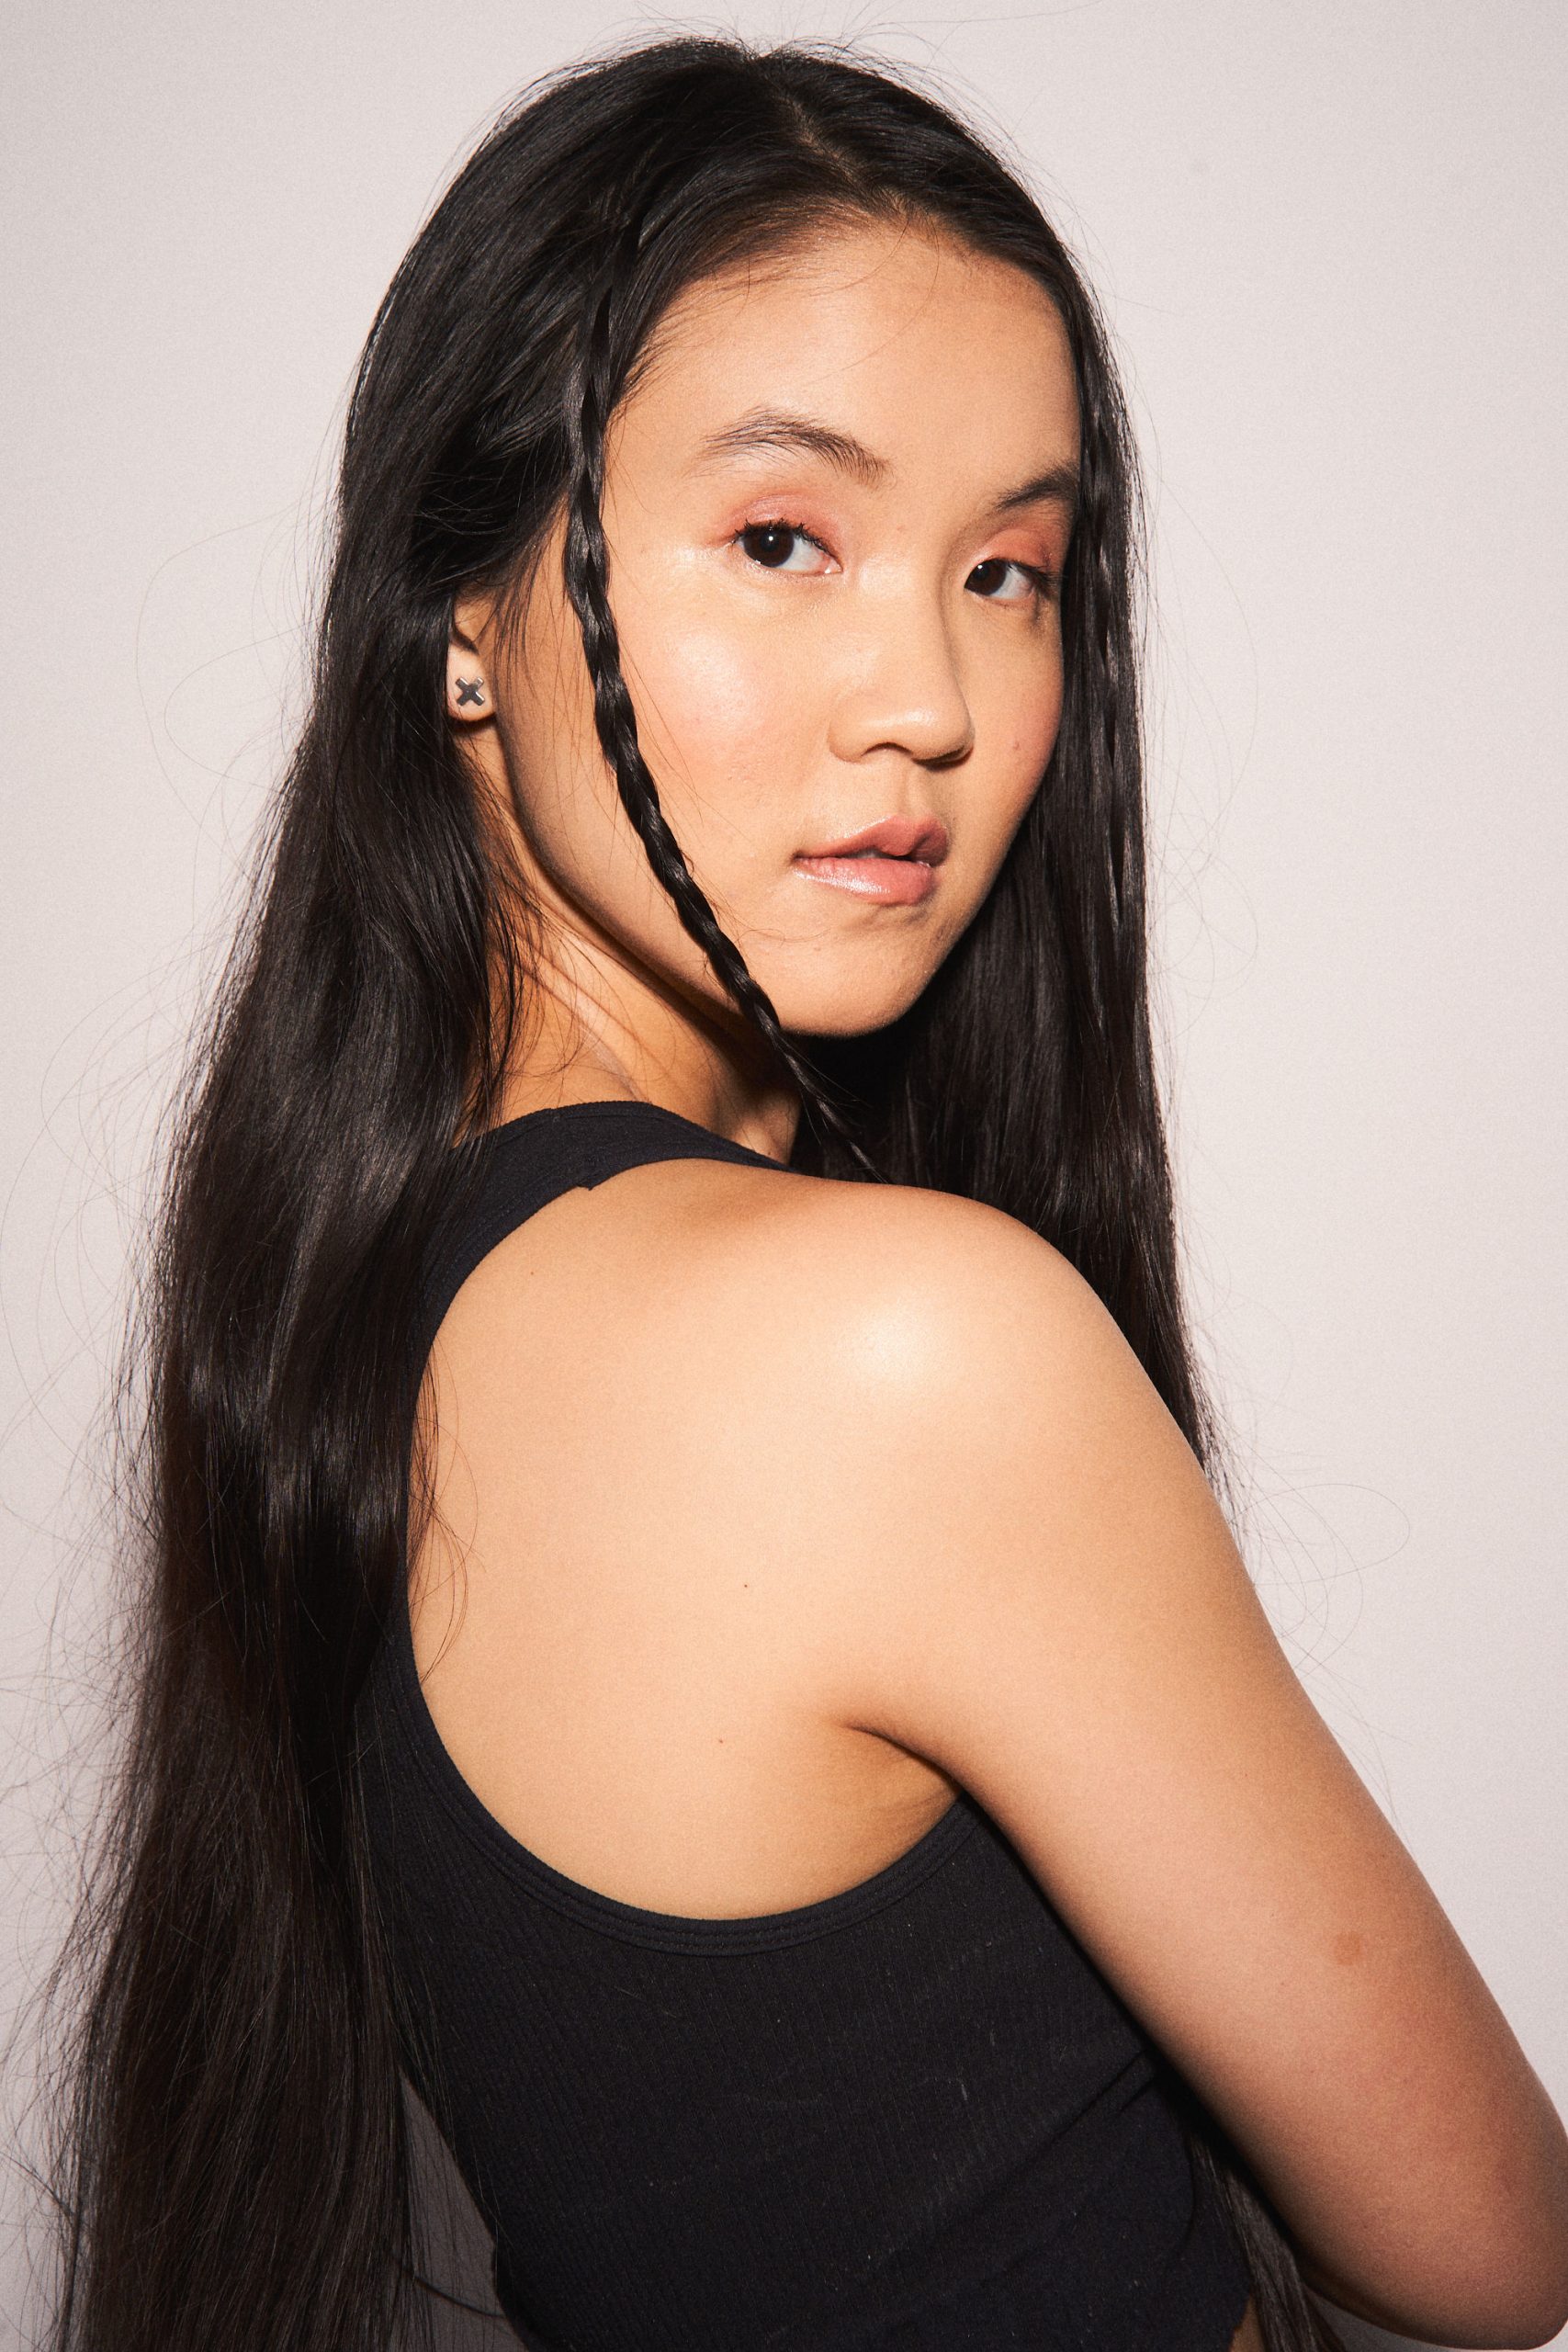 photo of Heather Muriel Nguyen, a Vietnamese American person with straight black hair and a black tank top